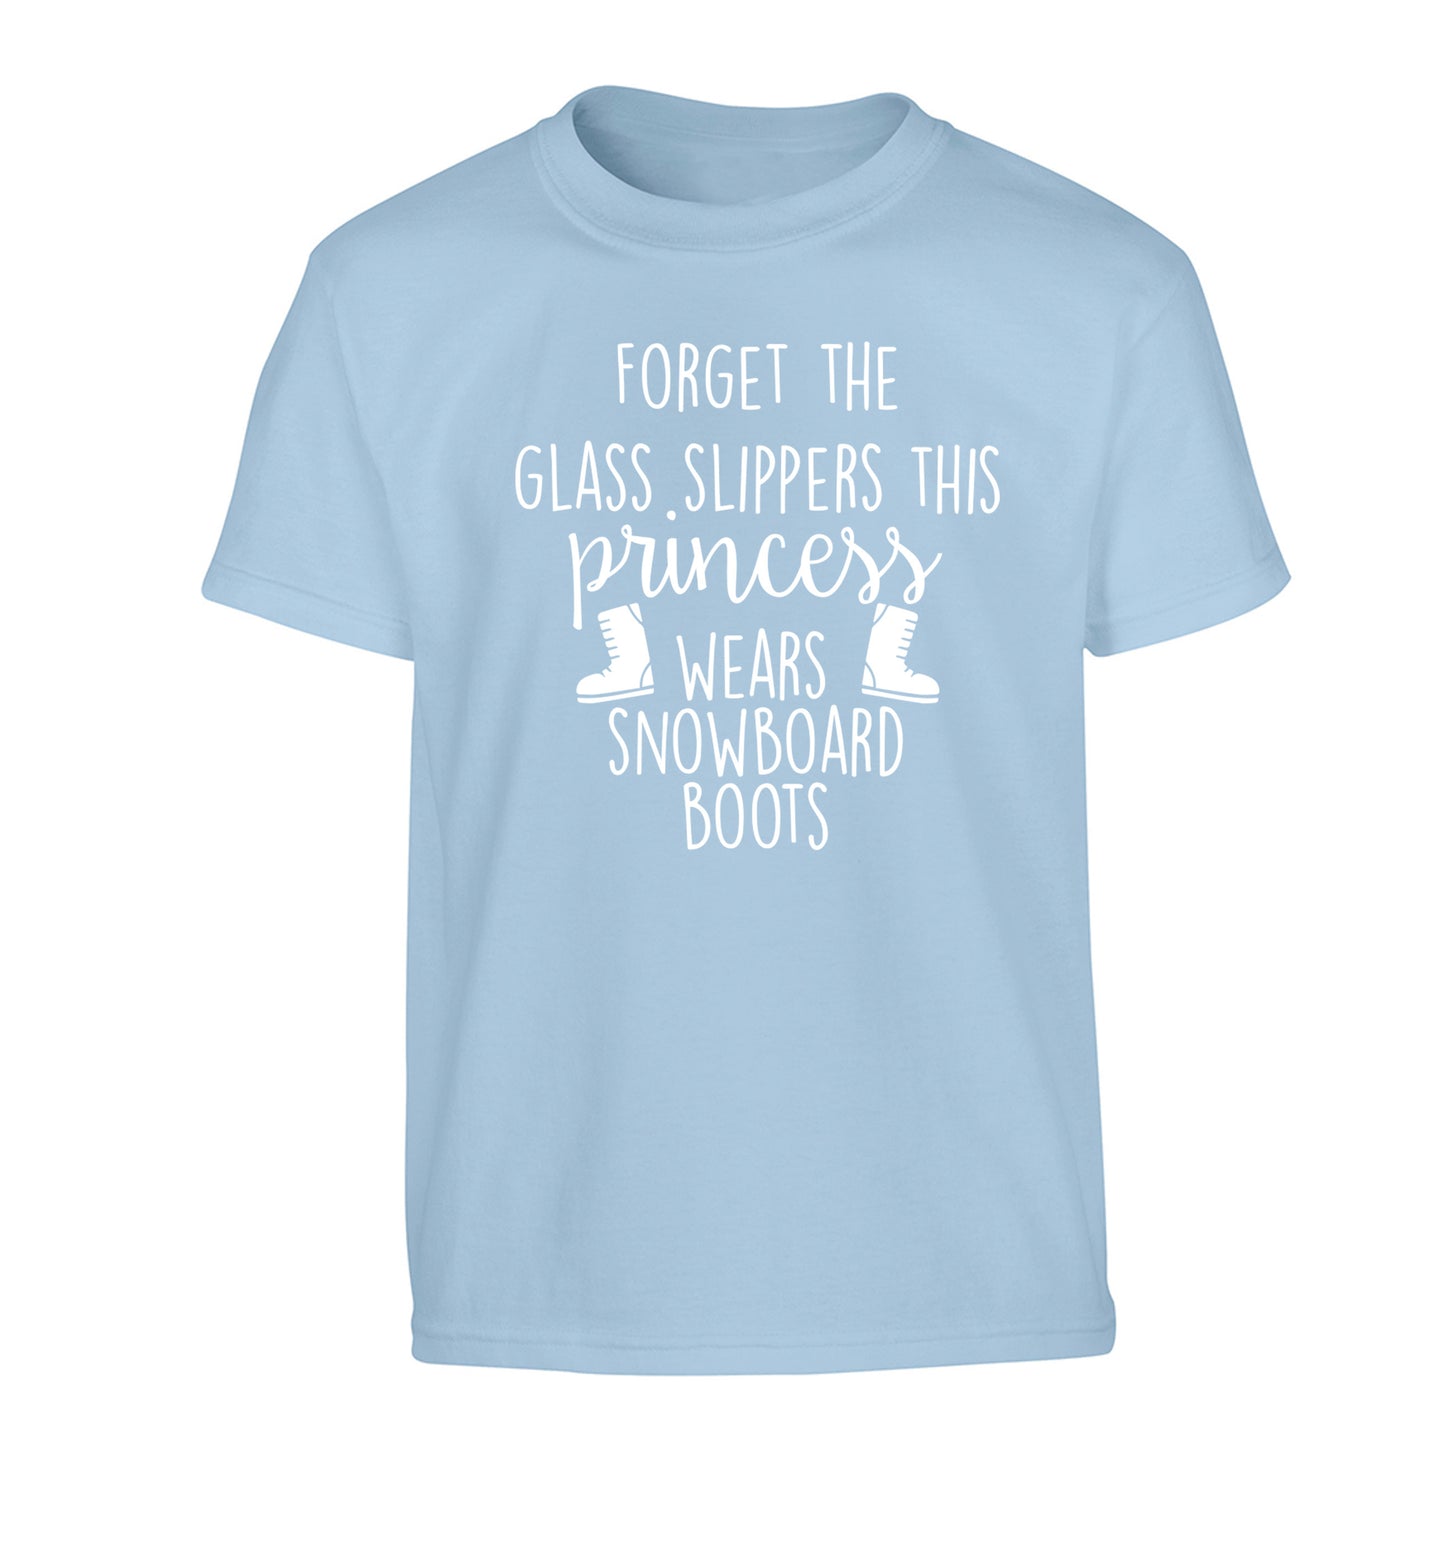 Forget the glass slippers this princess wears snowboard boots Children's light blue Tshirt 12-14 Years